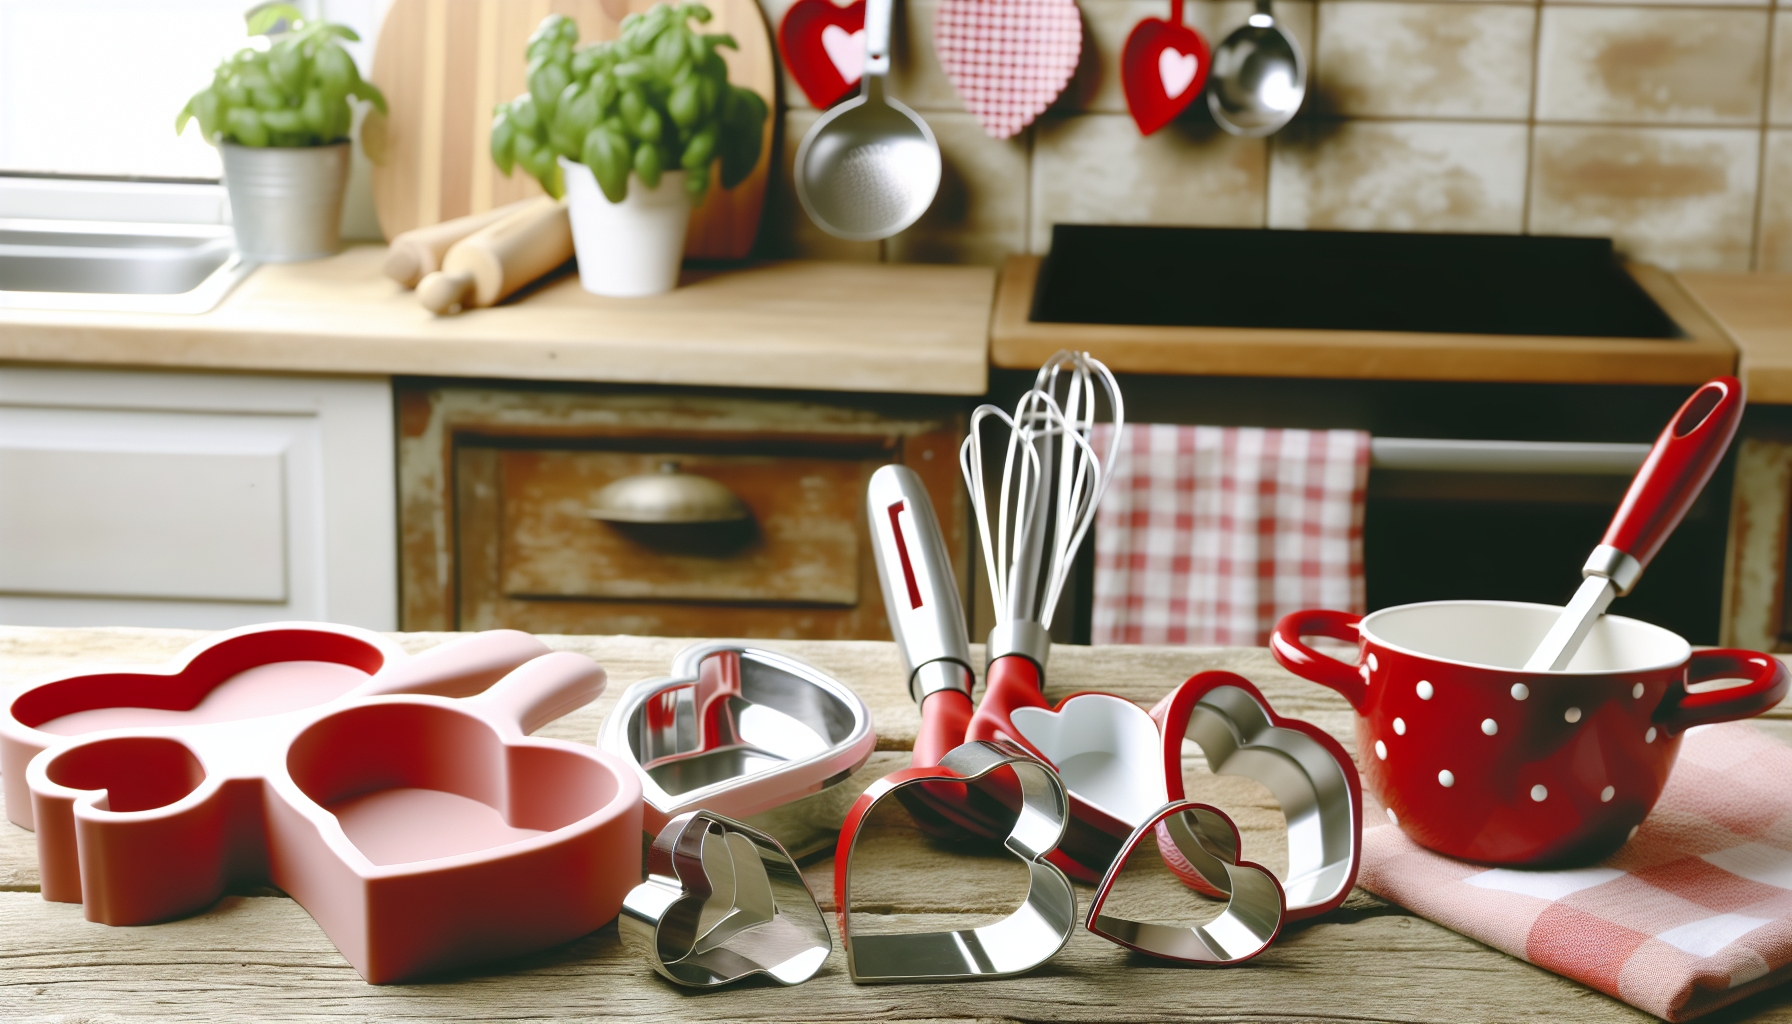 Heart-Shaped Kitchen Gadgets for Valentine's Day